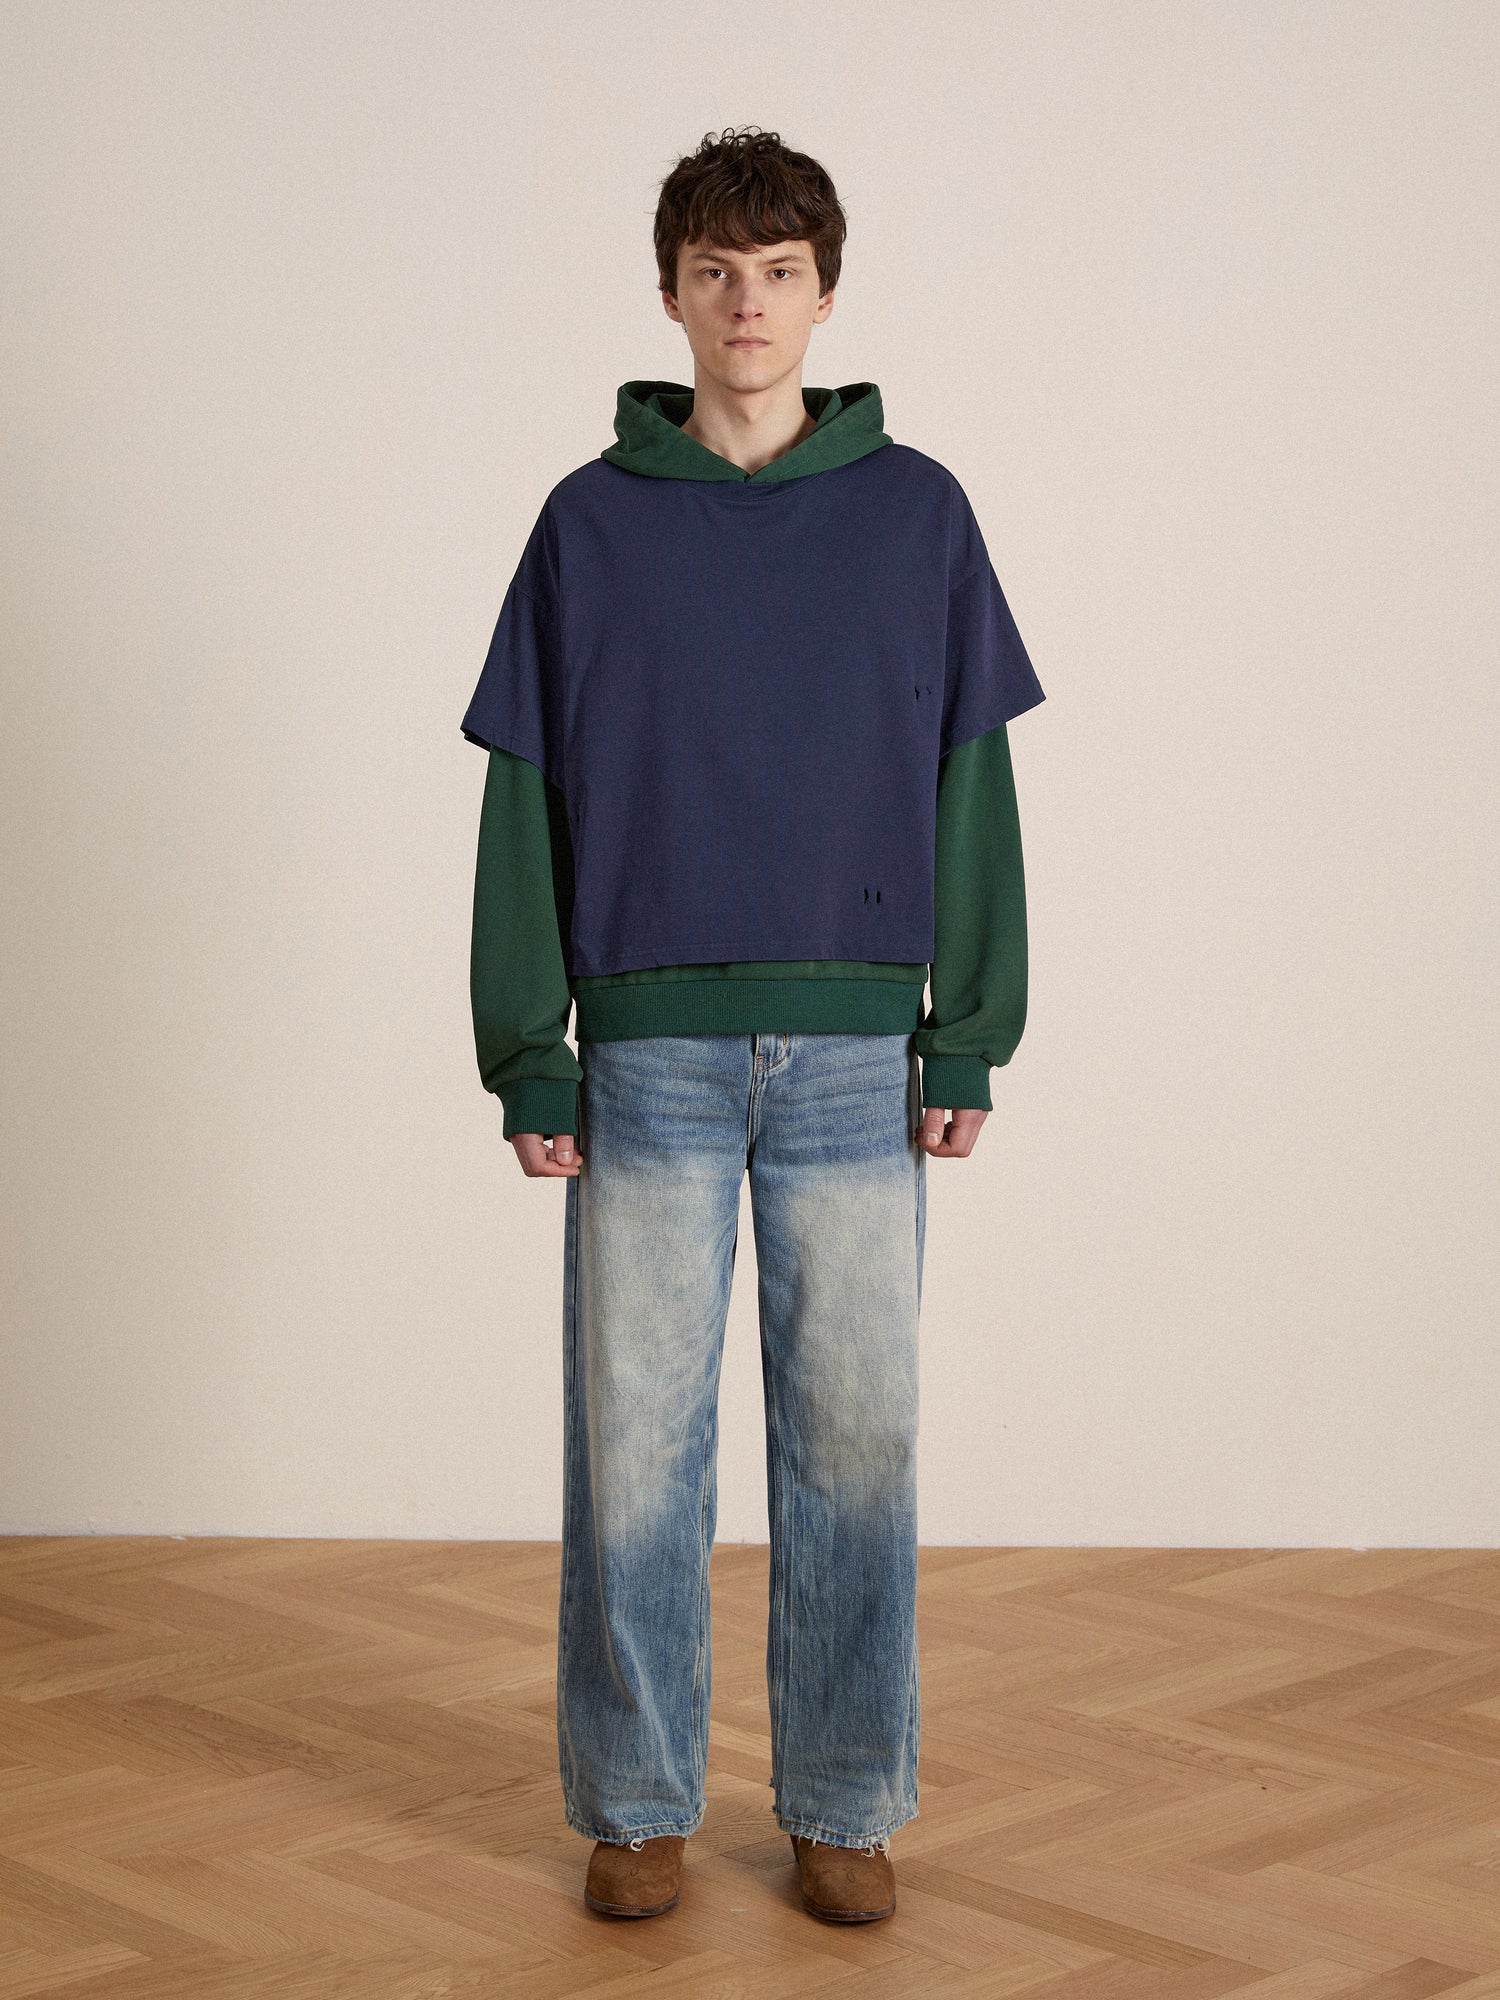 A man wearing a Found double layer hoodie and lacy baggy jeans standing on a wooden floor.